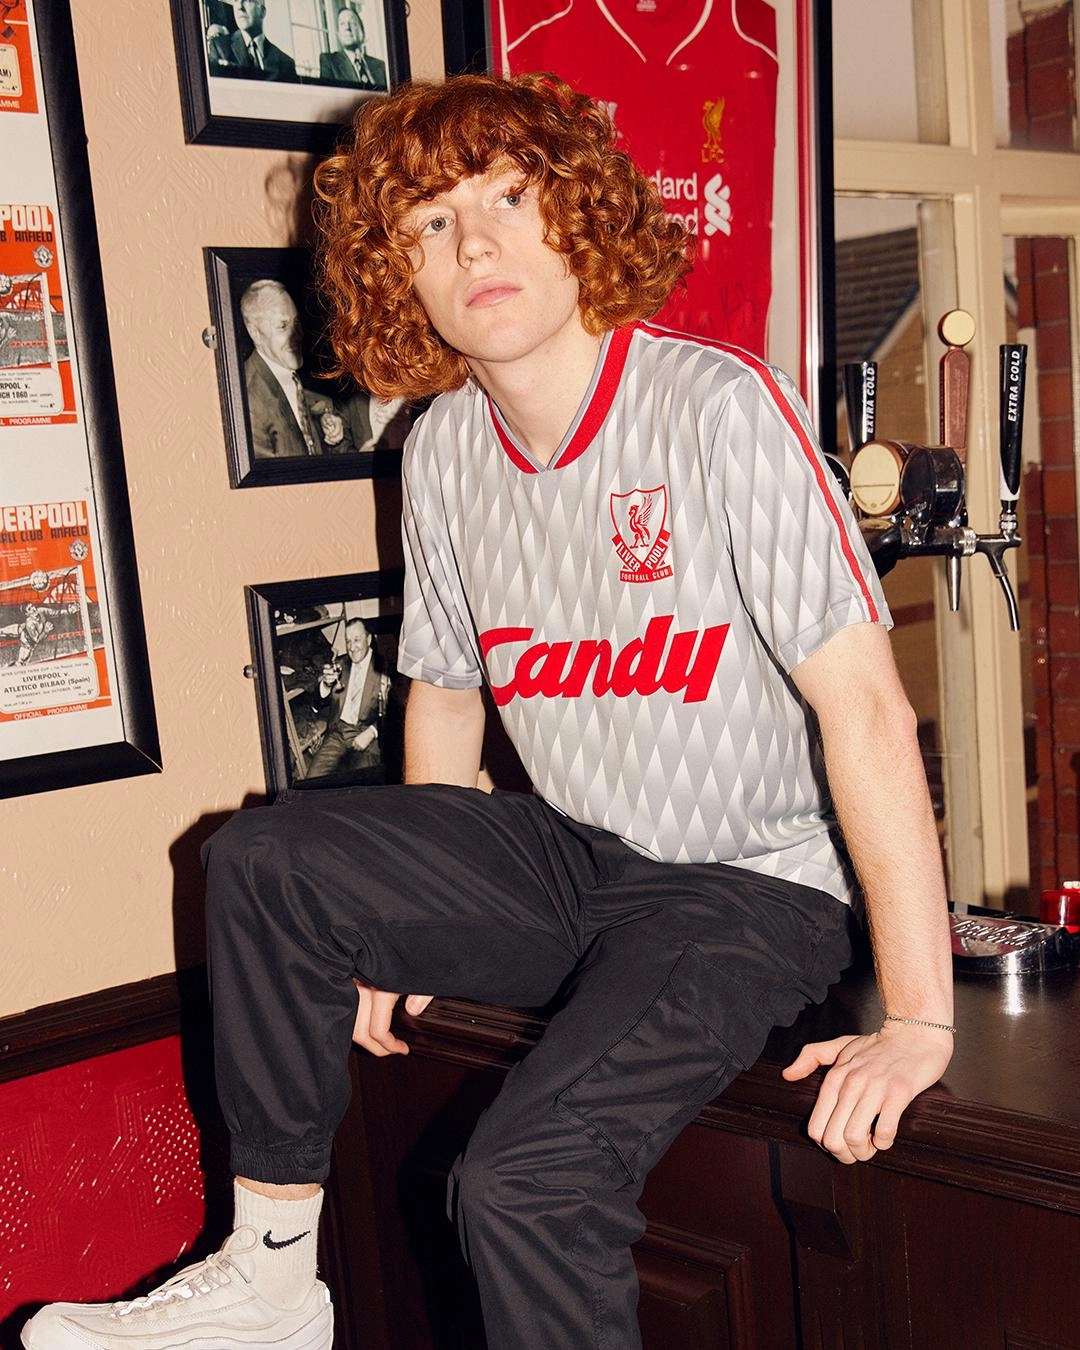 Roll back the years with LFC Retail's retro range - Liverpool FC